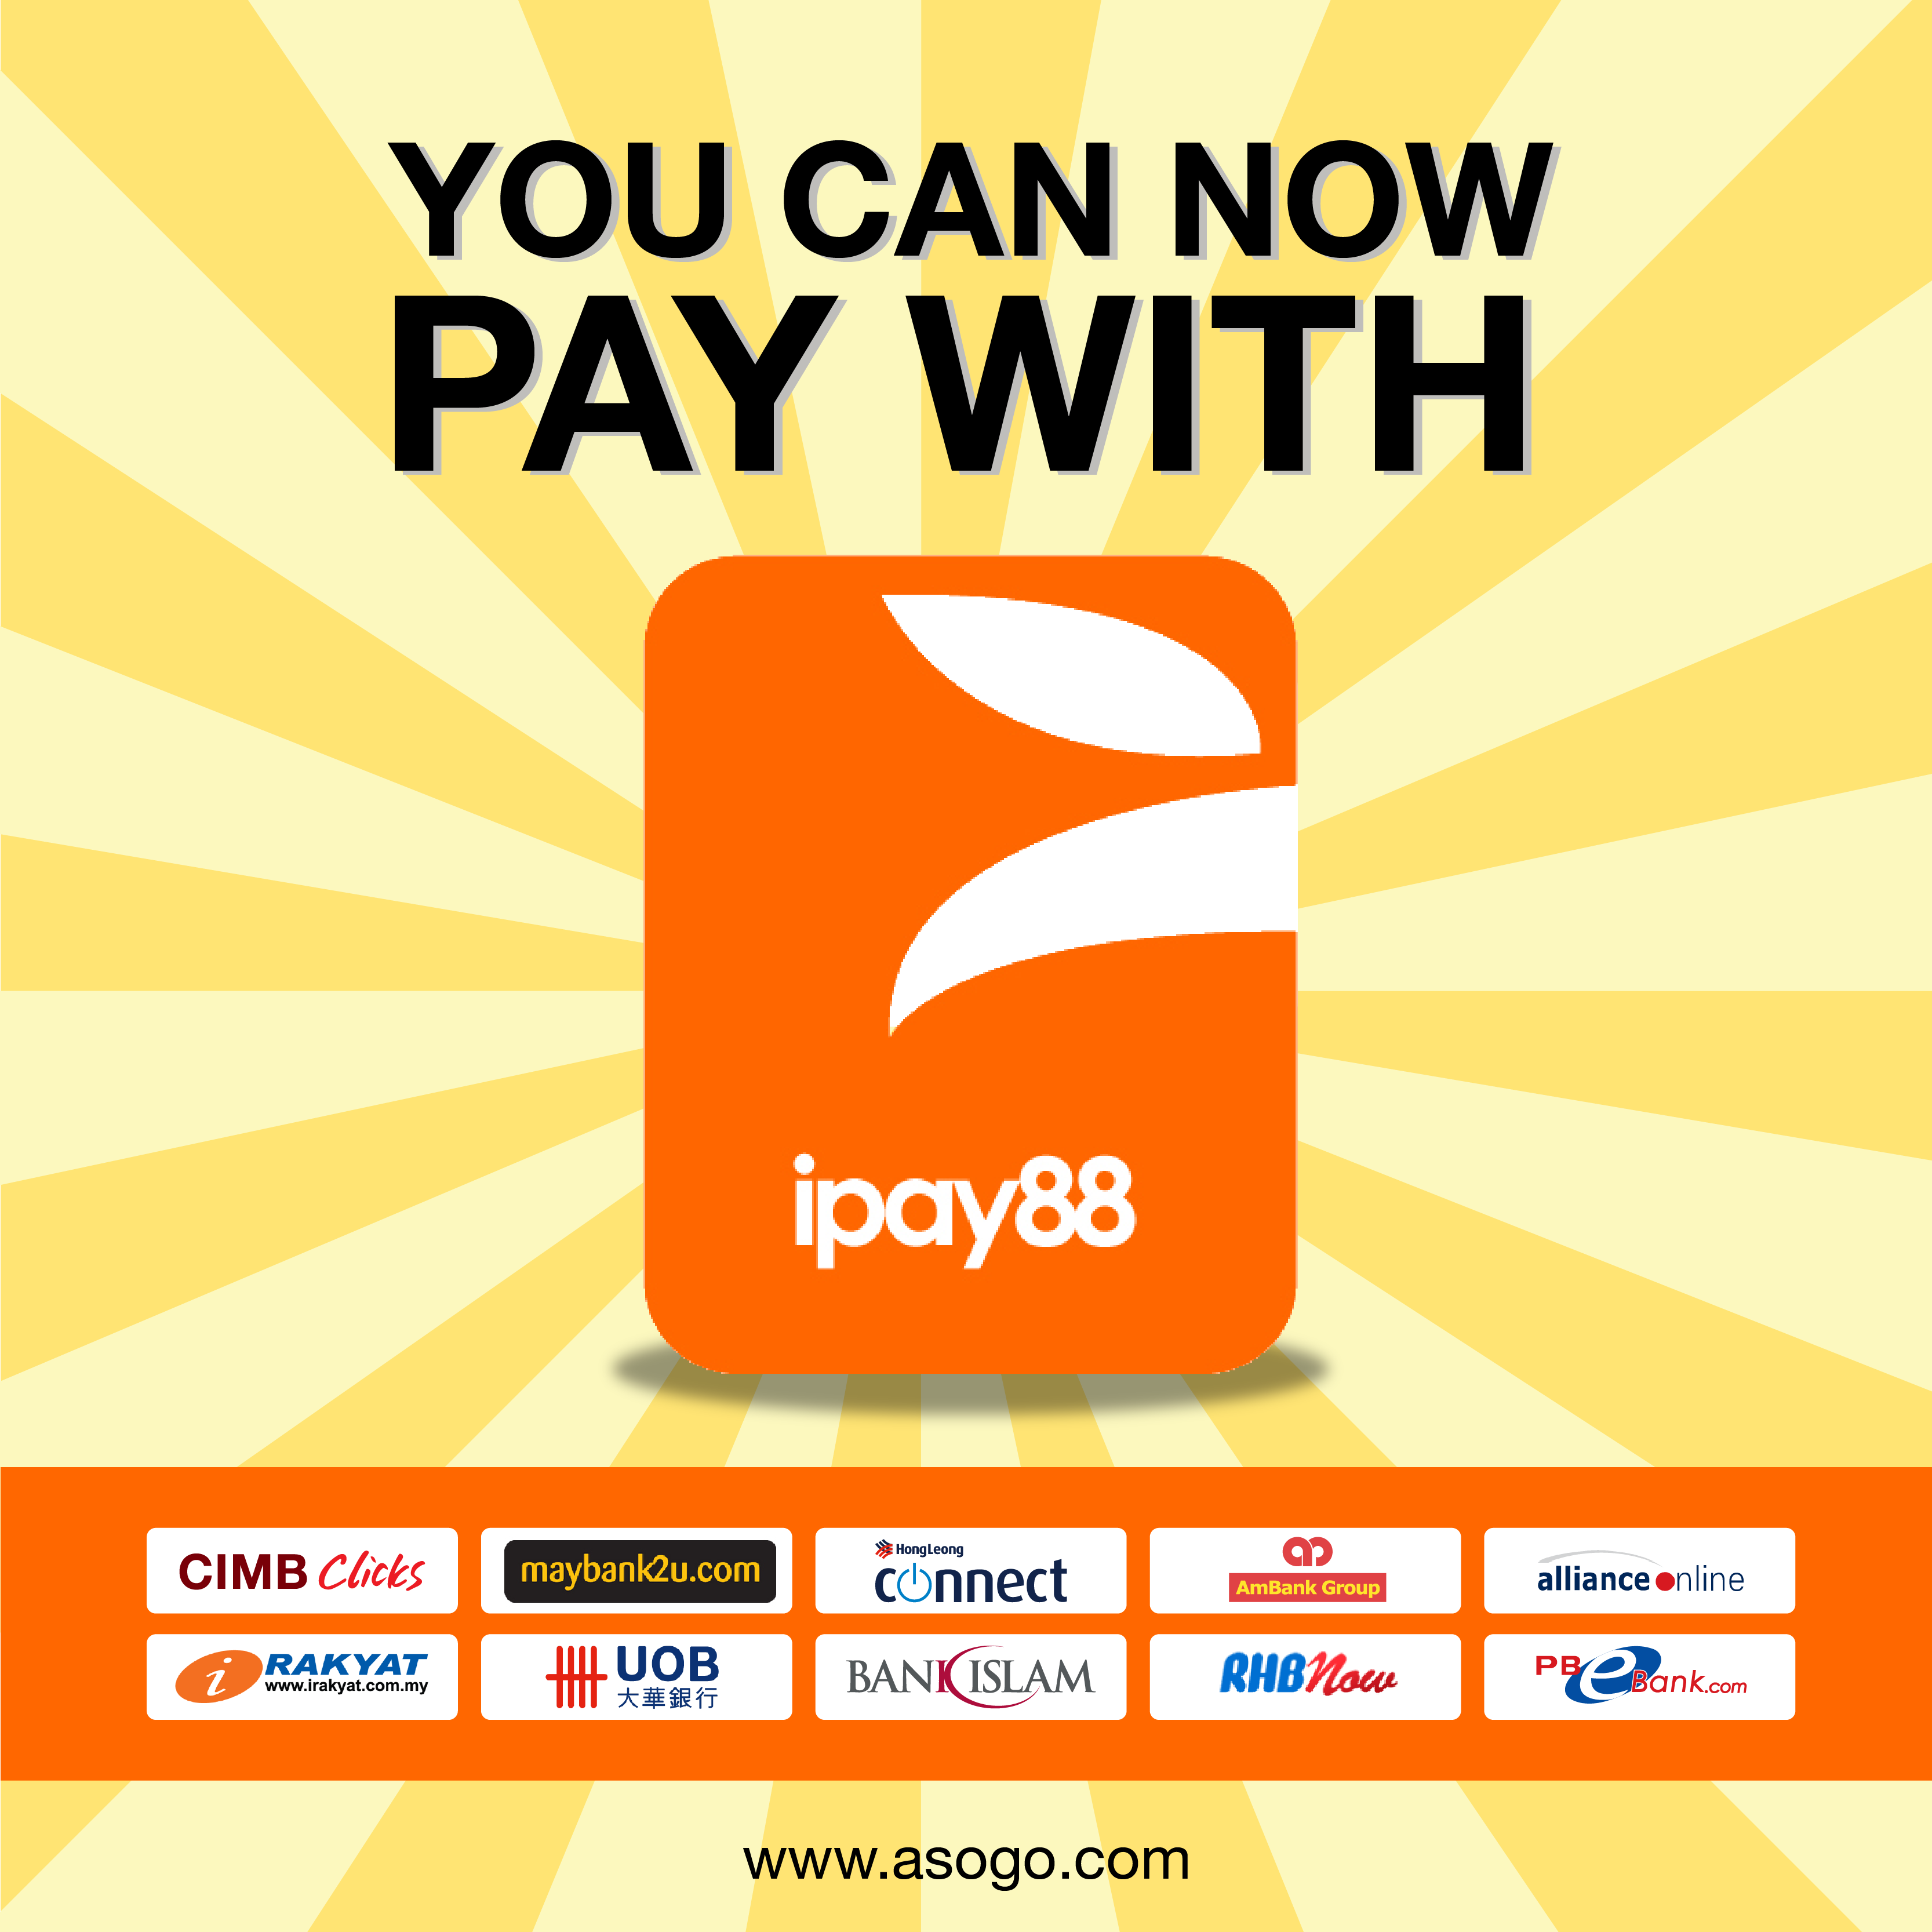 You can now pay with iPay88